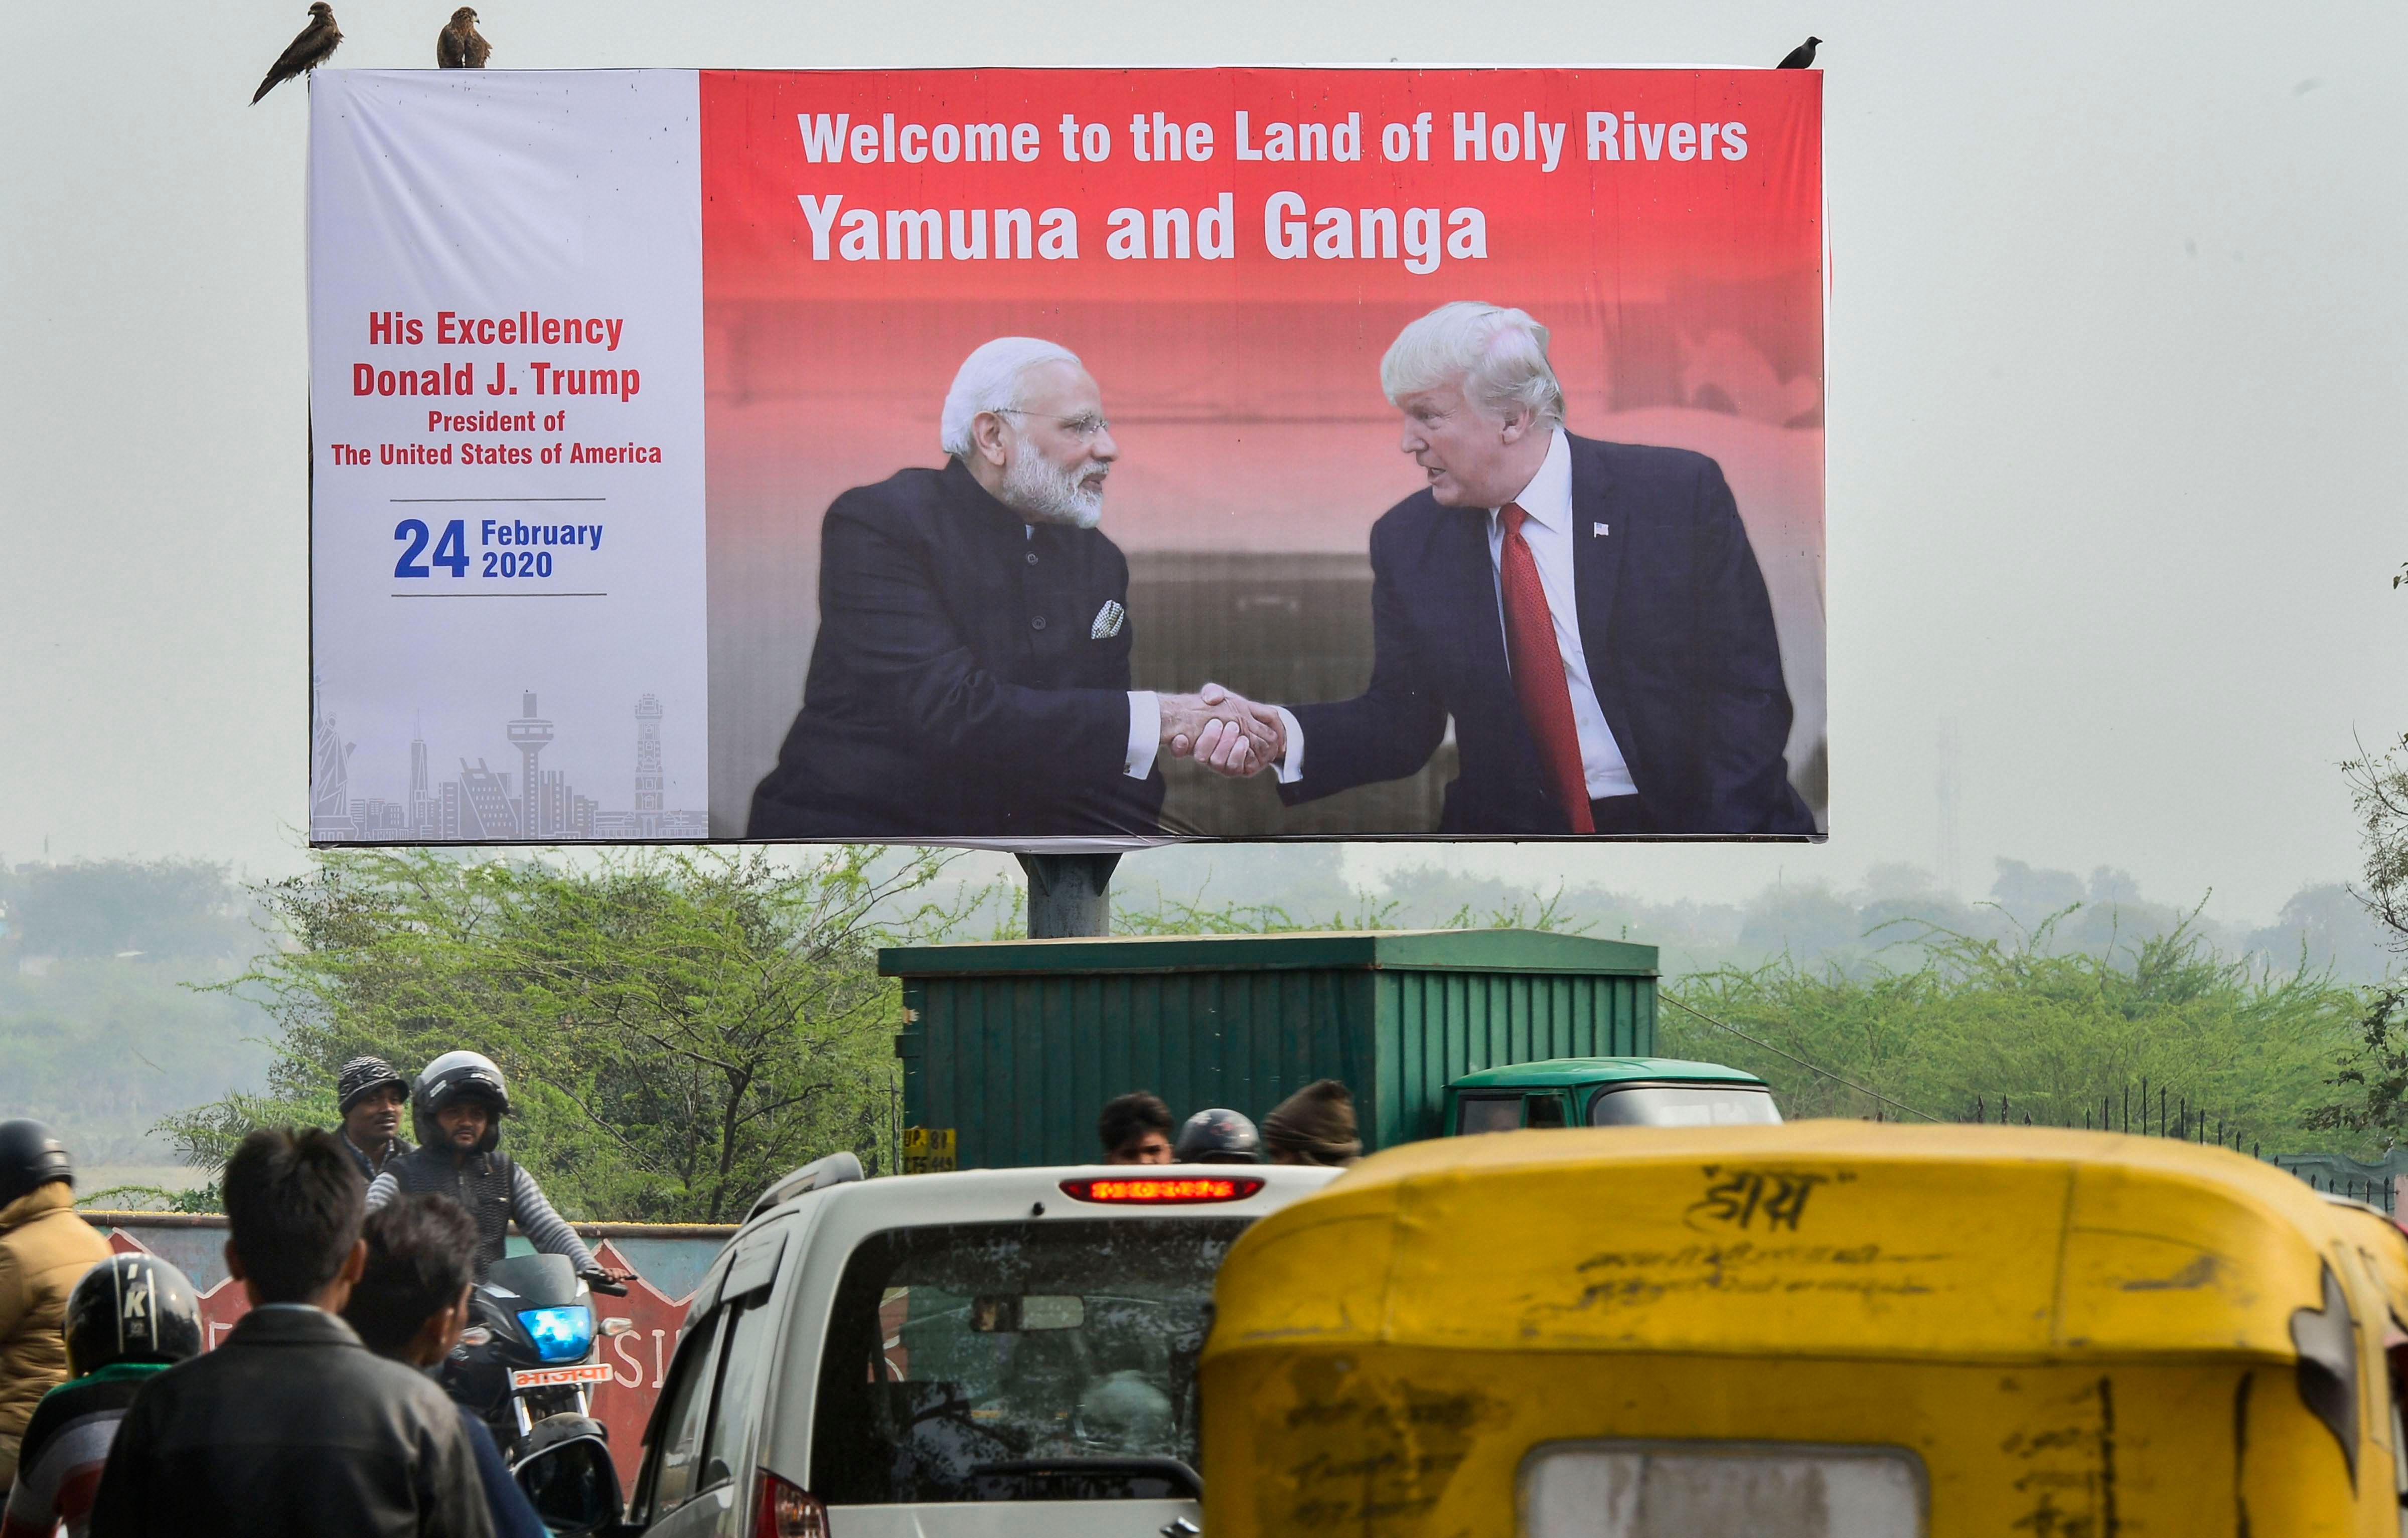 When asked about reports that Modi may accompany Trump to Agra, official sources said there was no such plan. (Credit: PTI Photo)